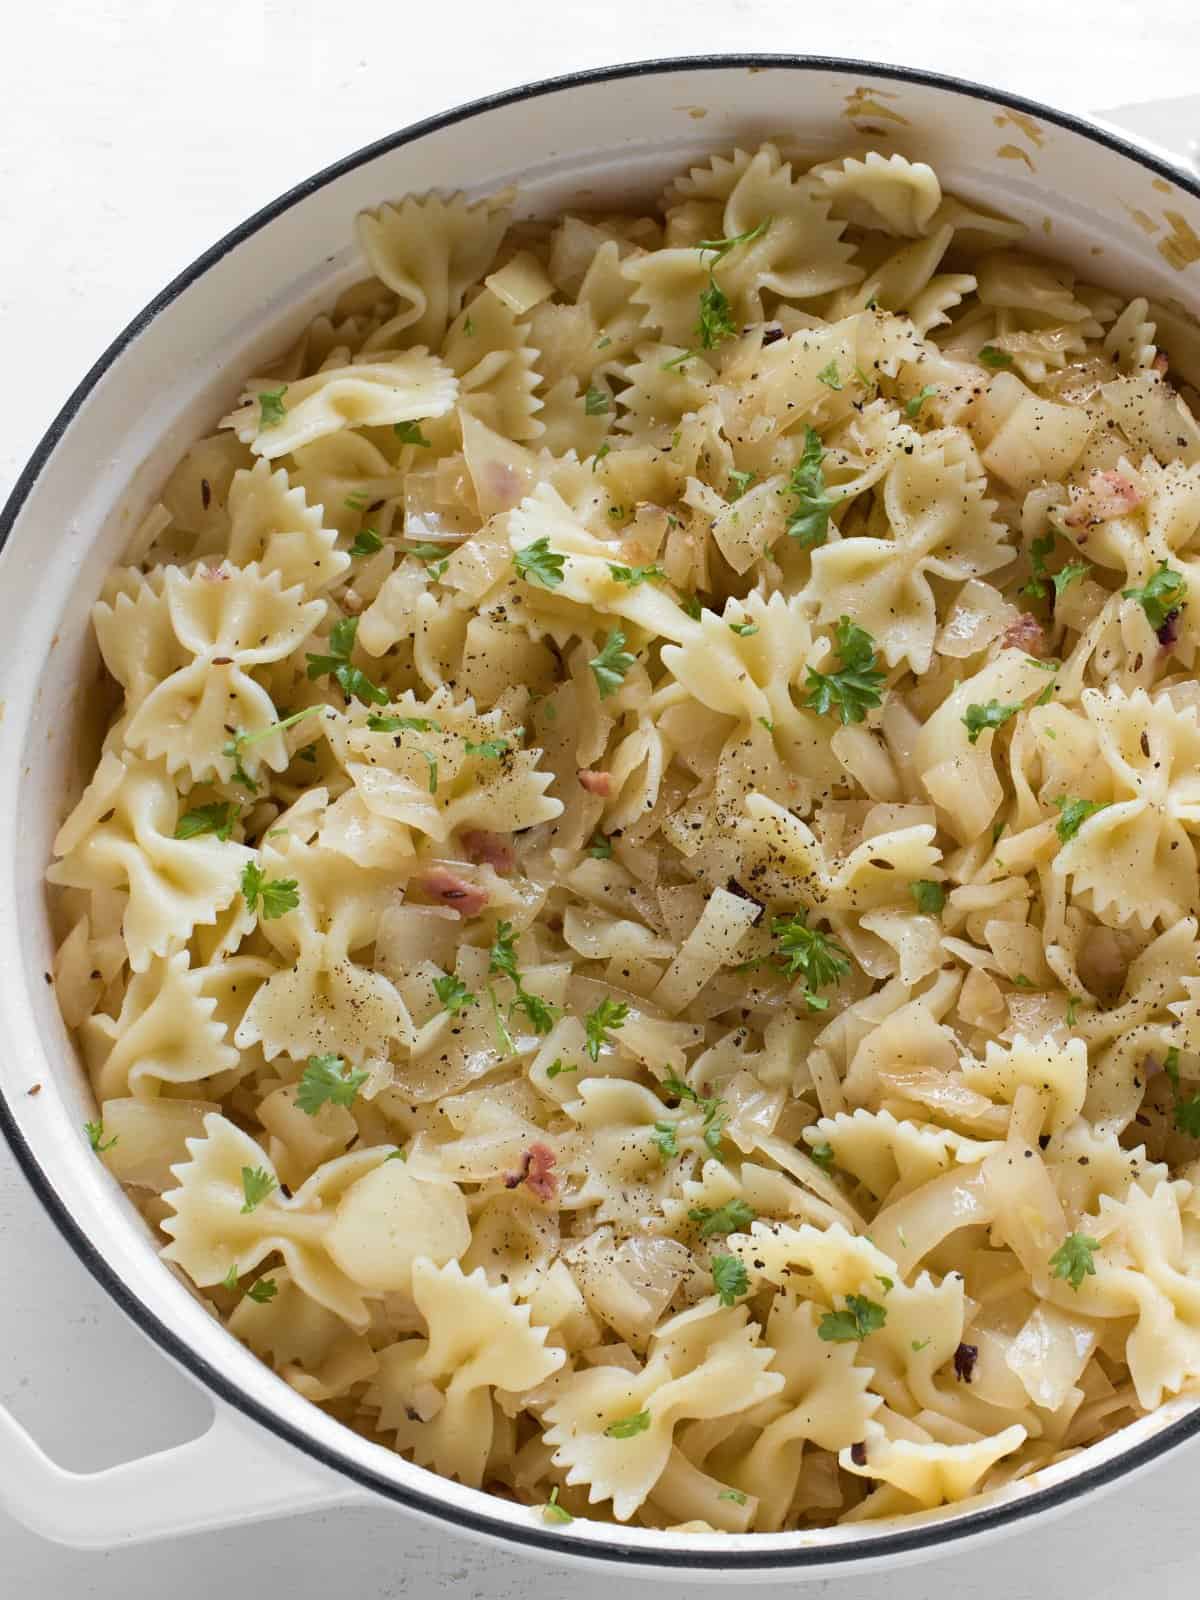 Haluski made with fried cabbage and bow tie pasta.